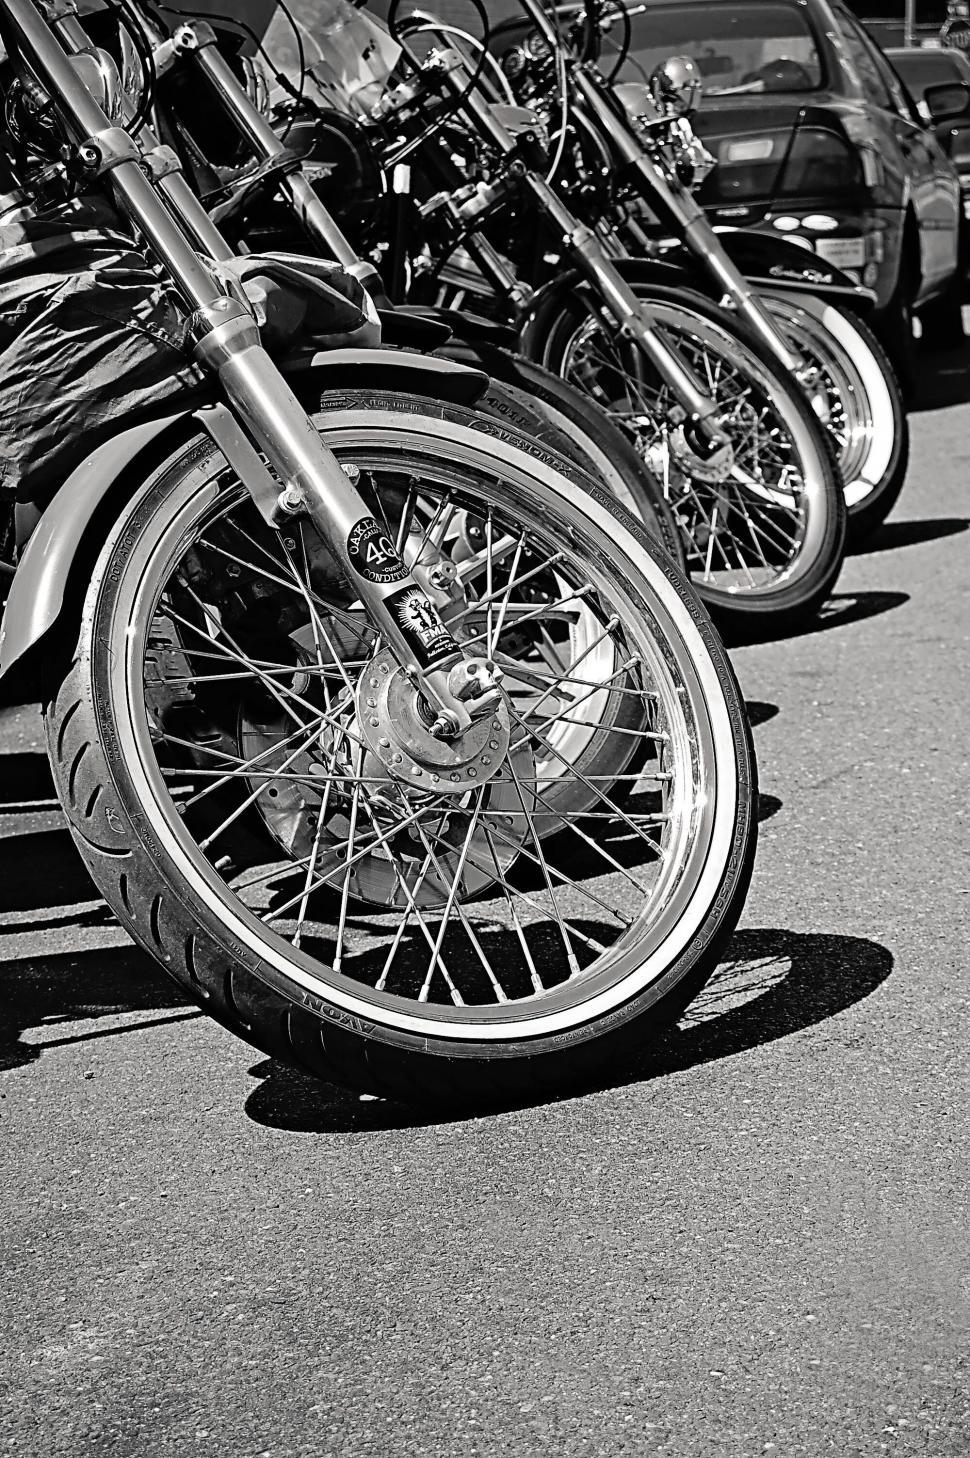 Free Image of Motorcycle wheels in black and white 